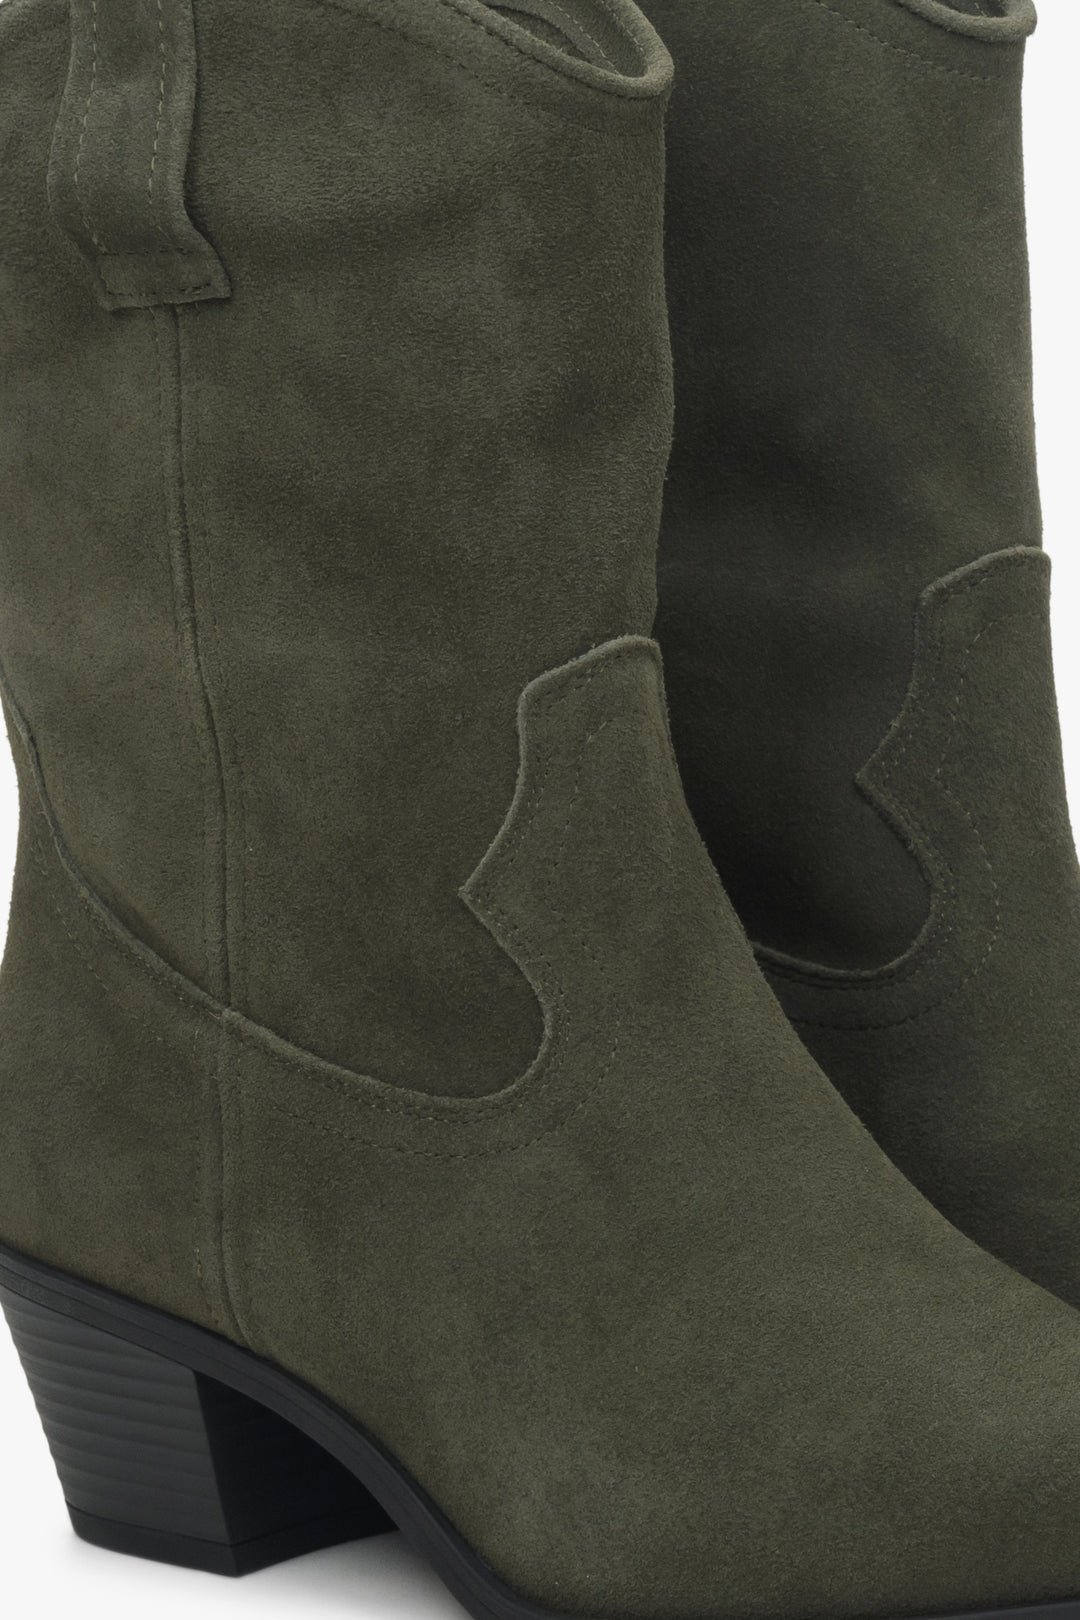 Women's dark green low-cut cowboy boots made of genuine suede by Estro - close-up on details.